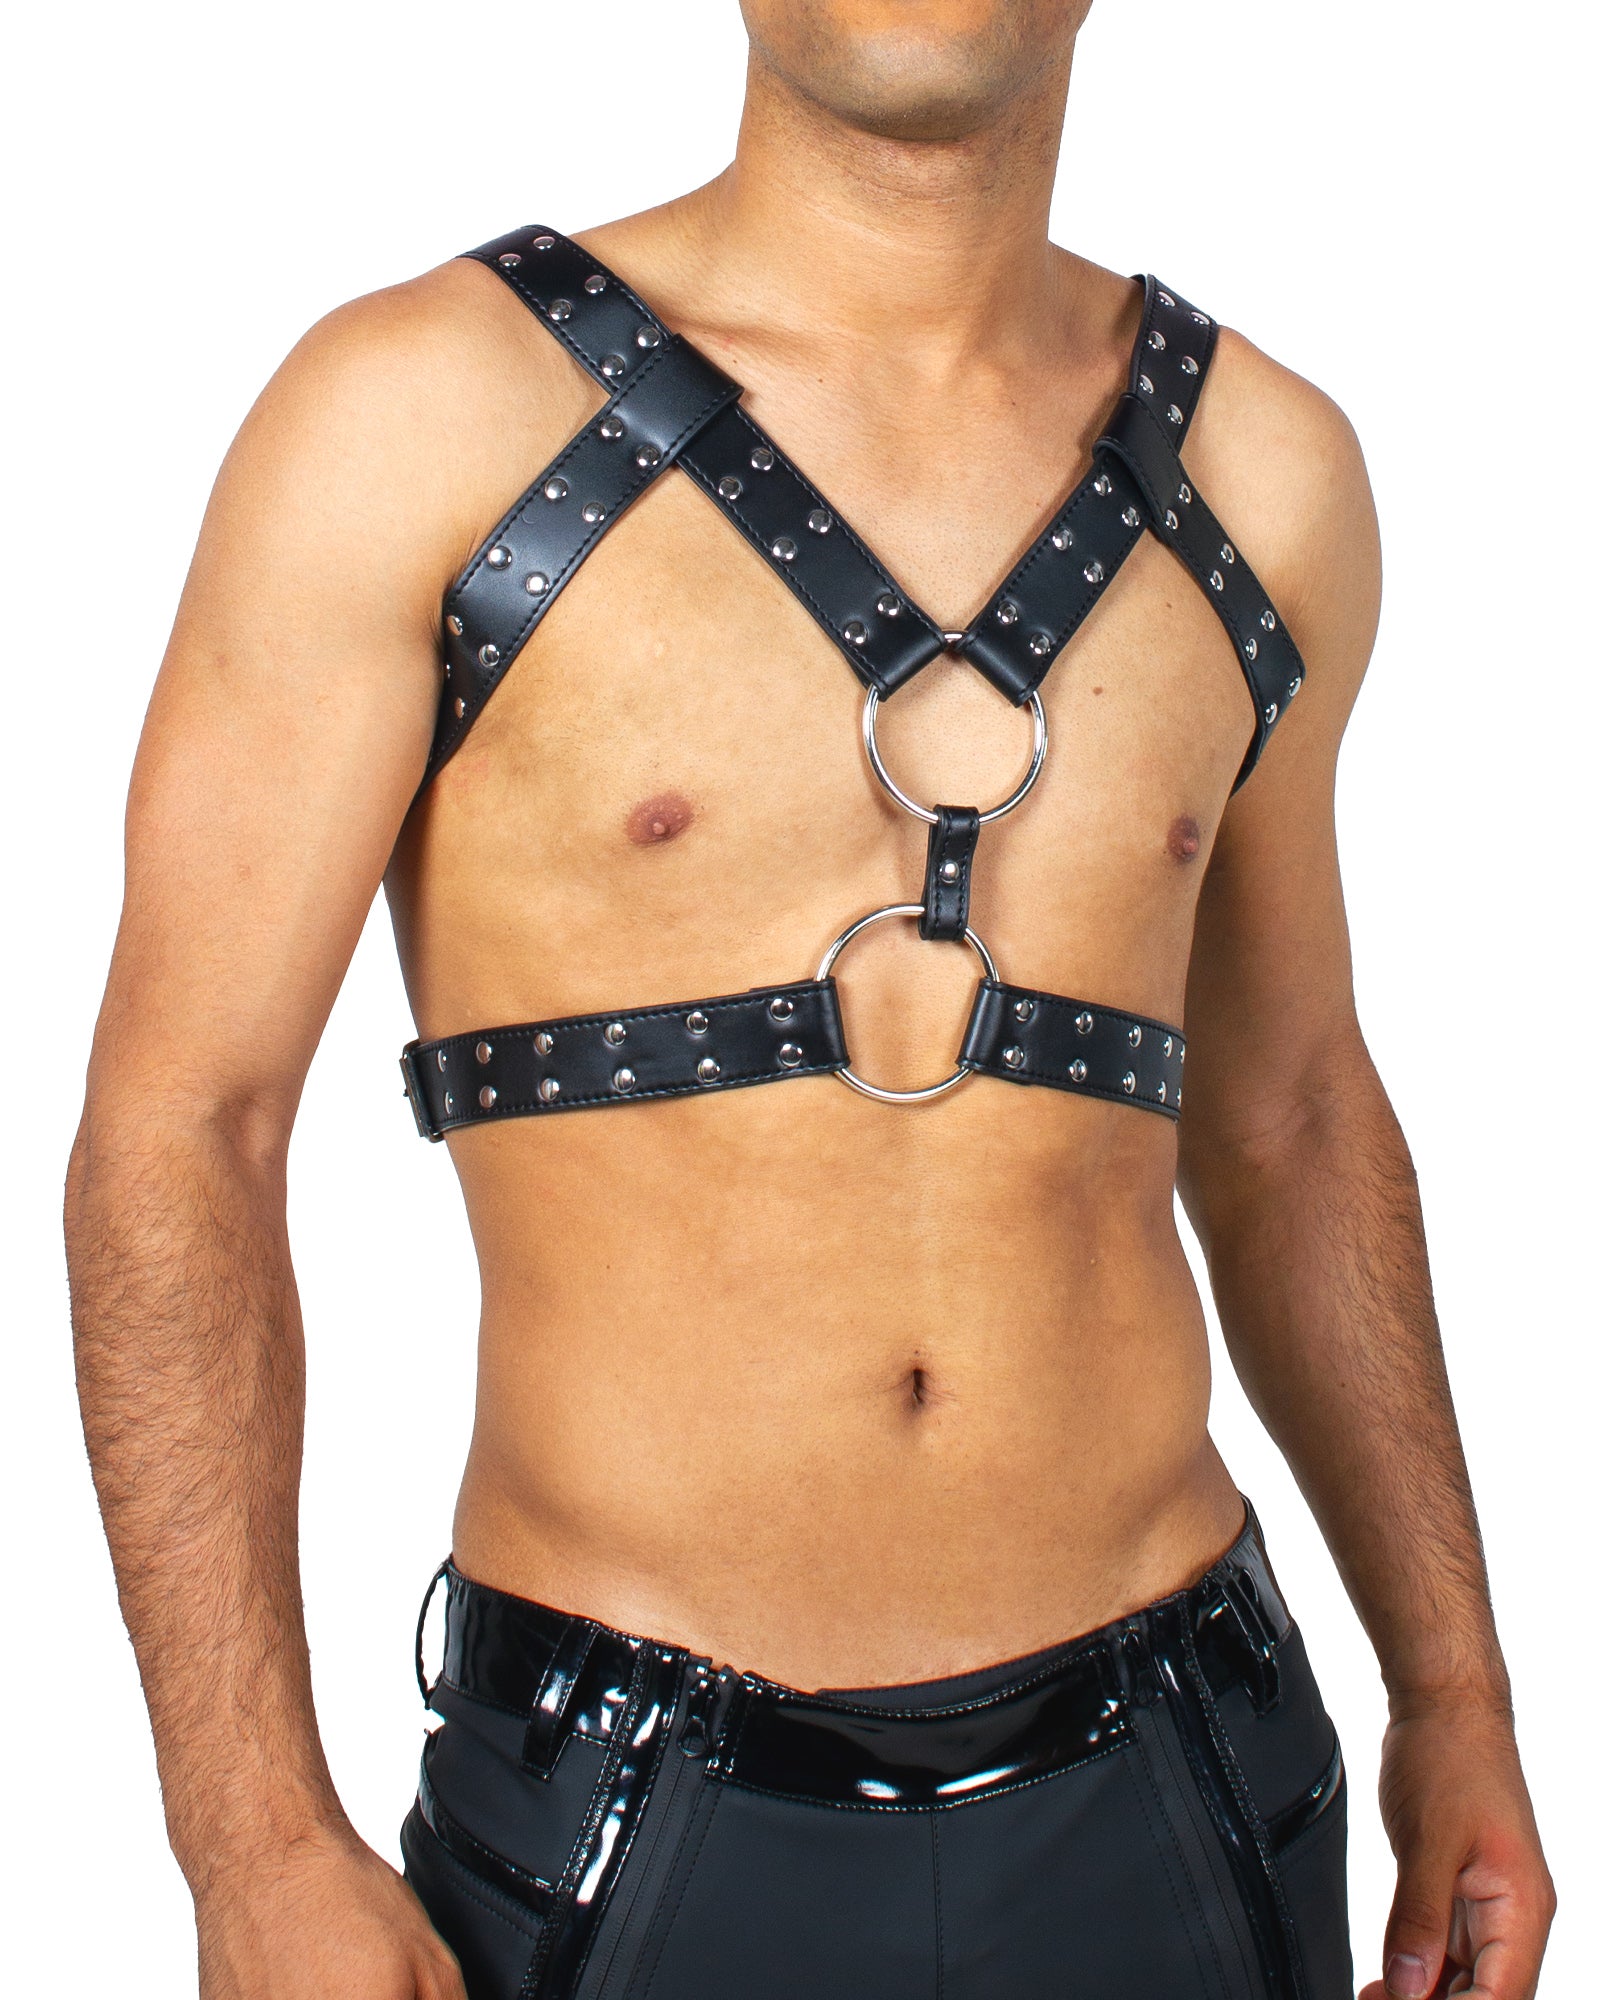 XXX DOUBLE RING HARNESS.